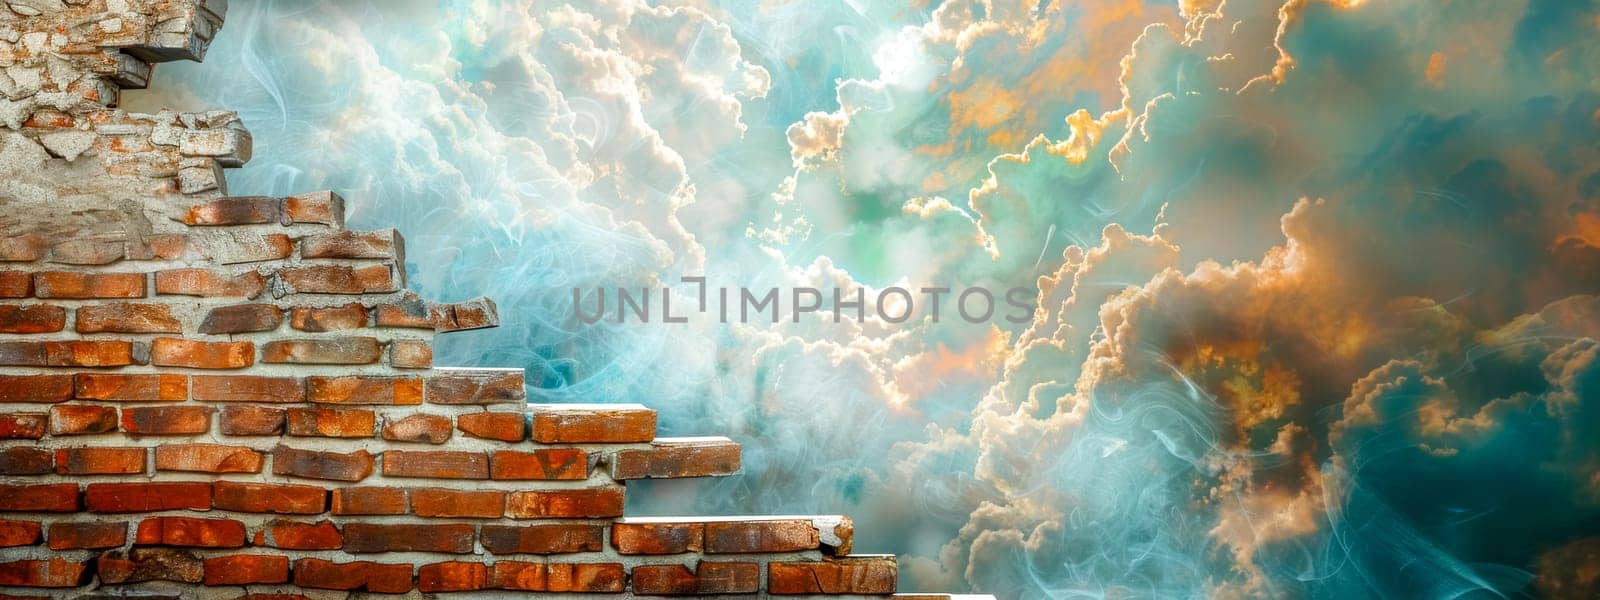 Surreal image of an old brick staircase leading up to a vibrant, cloudy sky with ethereal lighting